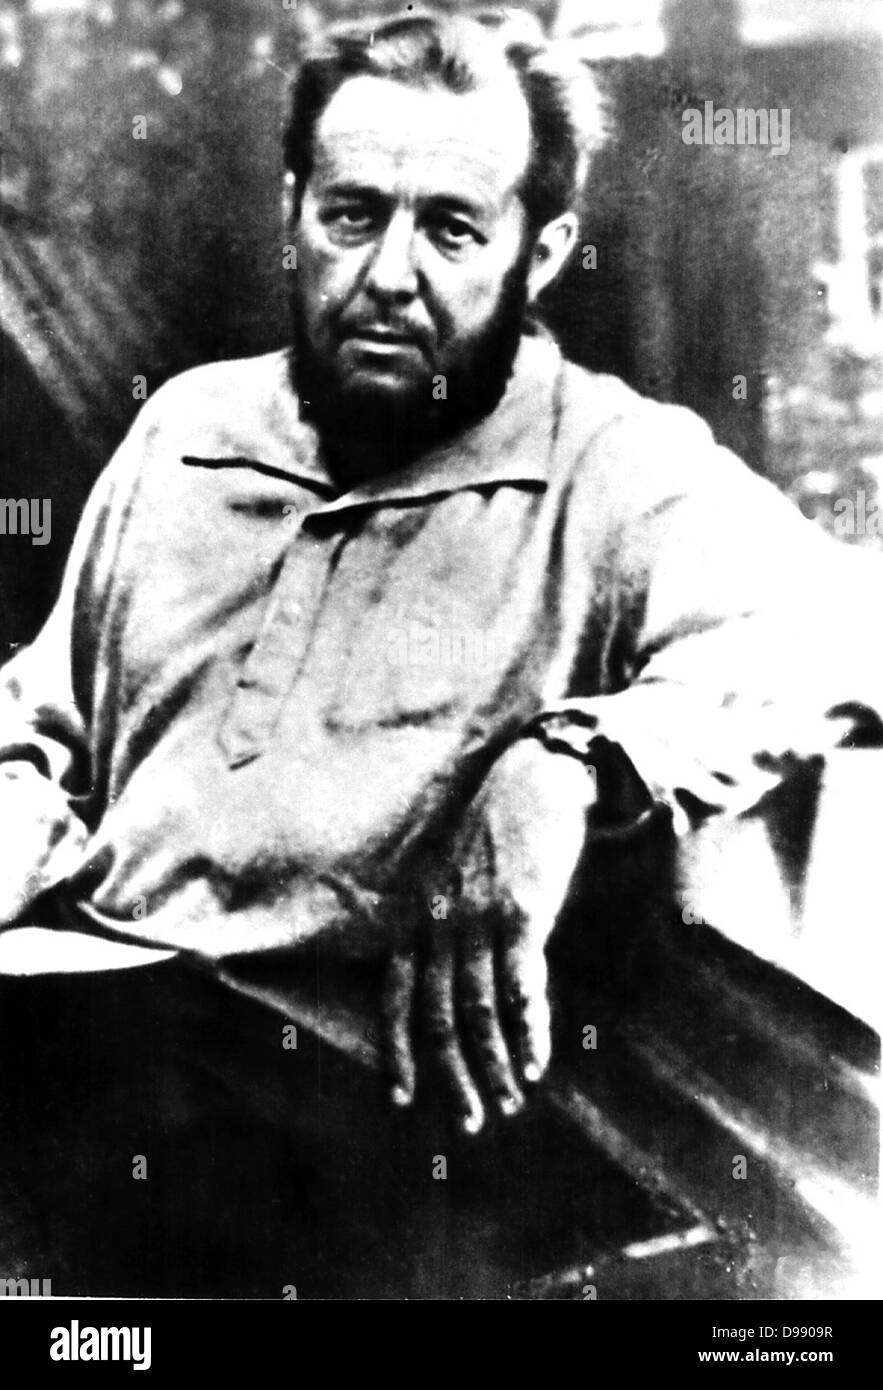 Aleksandr Isayevich Solzhenitsyn  (December 11, 1918 – August 3, 2008)[2] was a Russian novelist, dramatist and historian. Through his writings he made the world aware of the Gulag, the Soviet Union's forced labor camp system — particularly The Gulag Archipelago and One Day in the Life of Ivan Denisovich, his two best-known works. For these efforts Solzhenitsyn was awarded the Nobel Prize in Literature in 1970, and exiled from the Soviet Union in 1974. He returned to Russia in 1994 Stock Photo